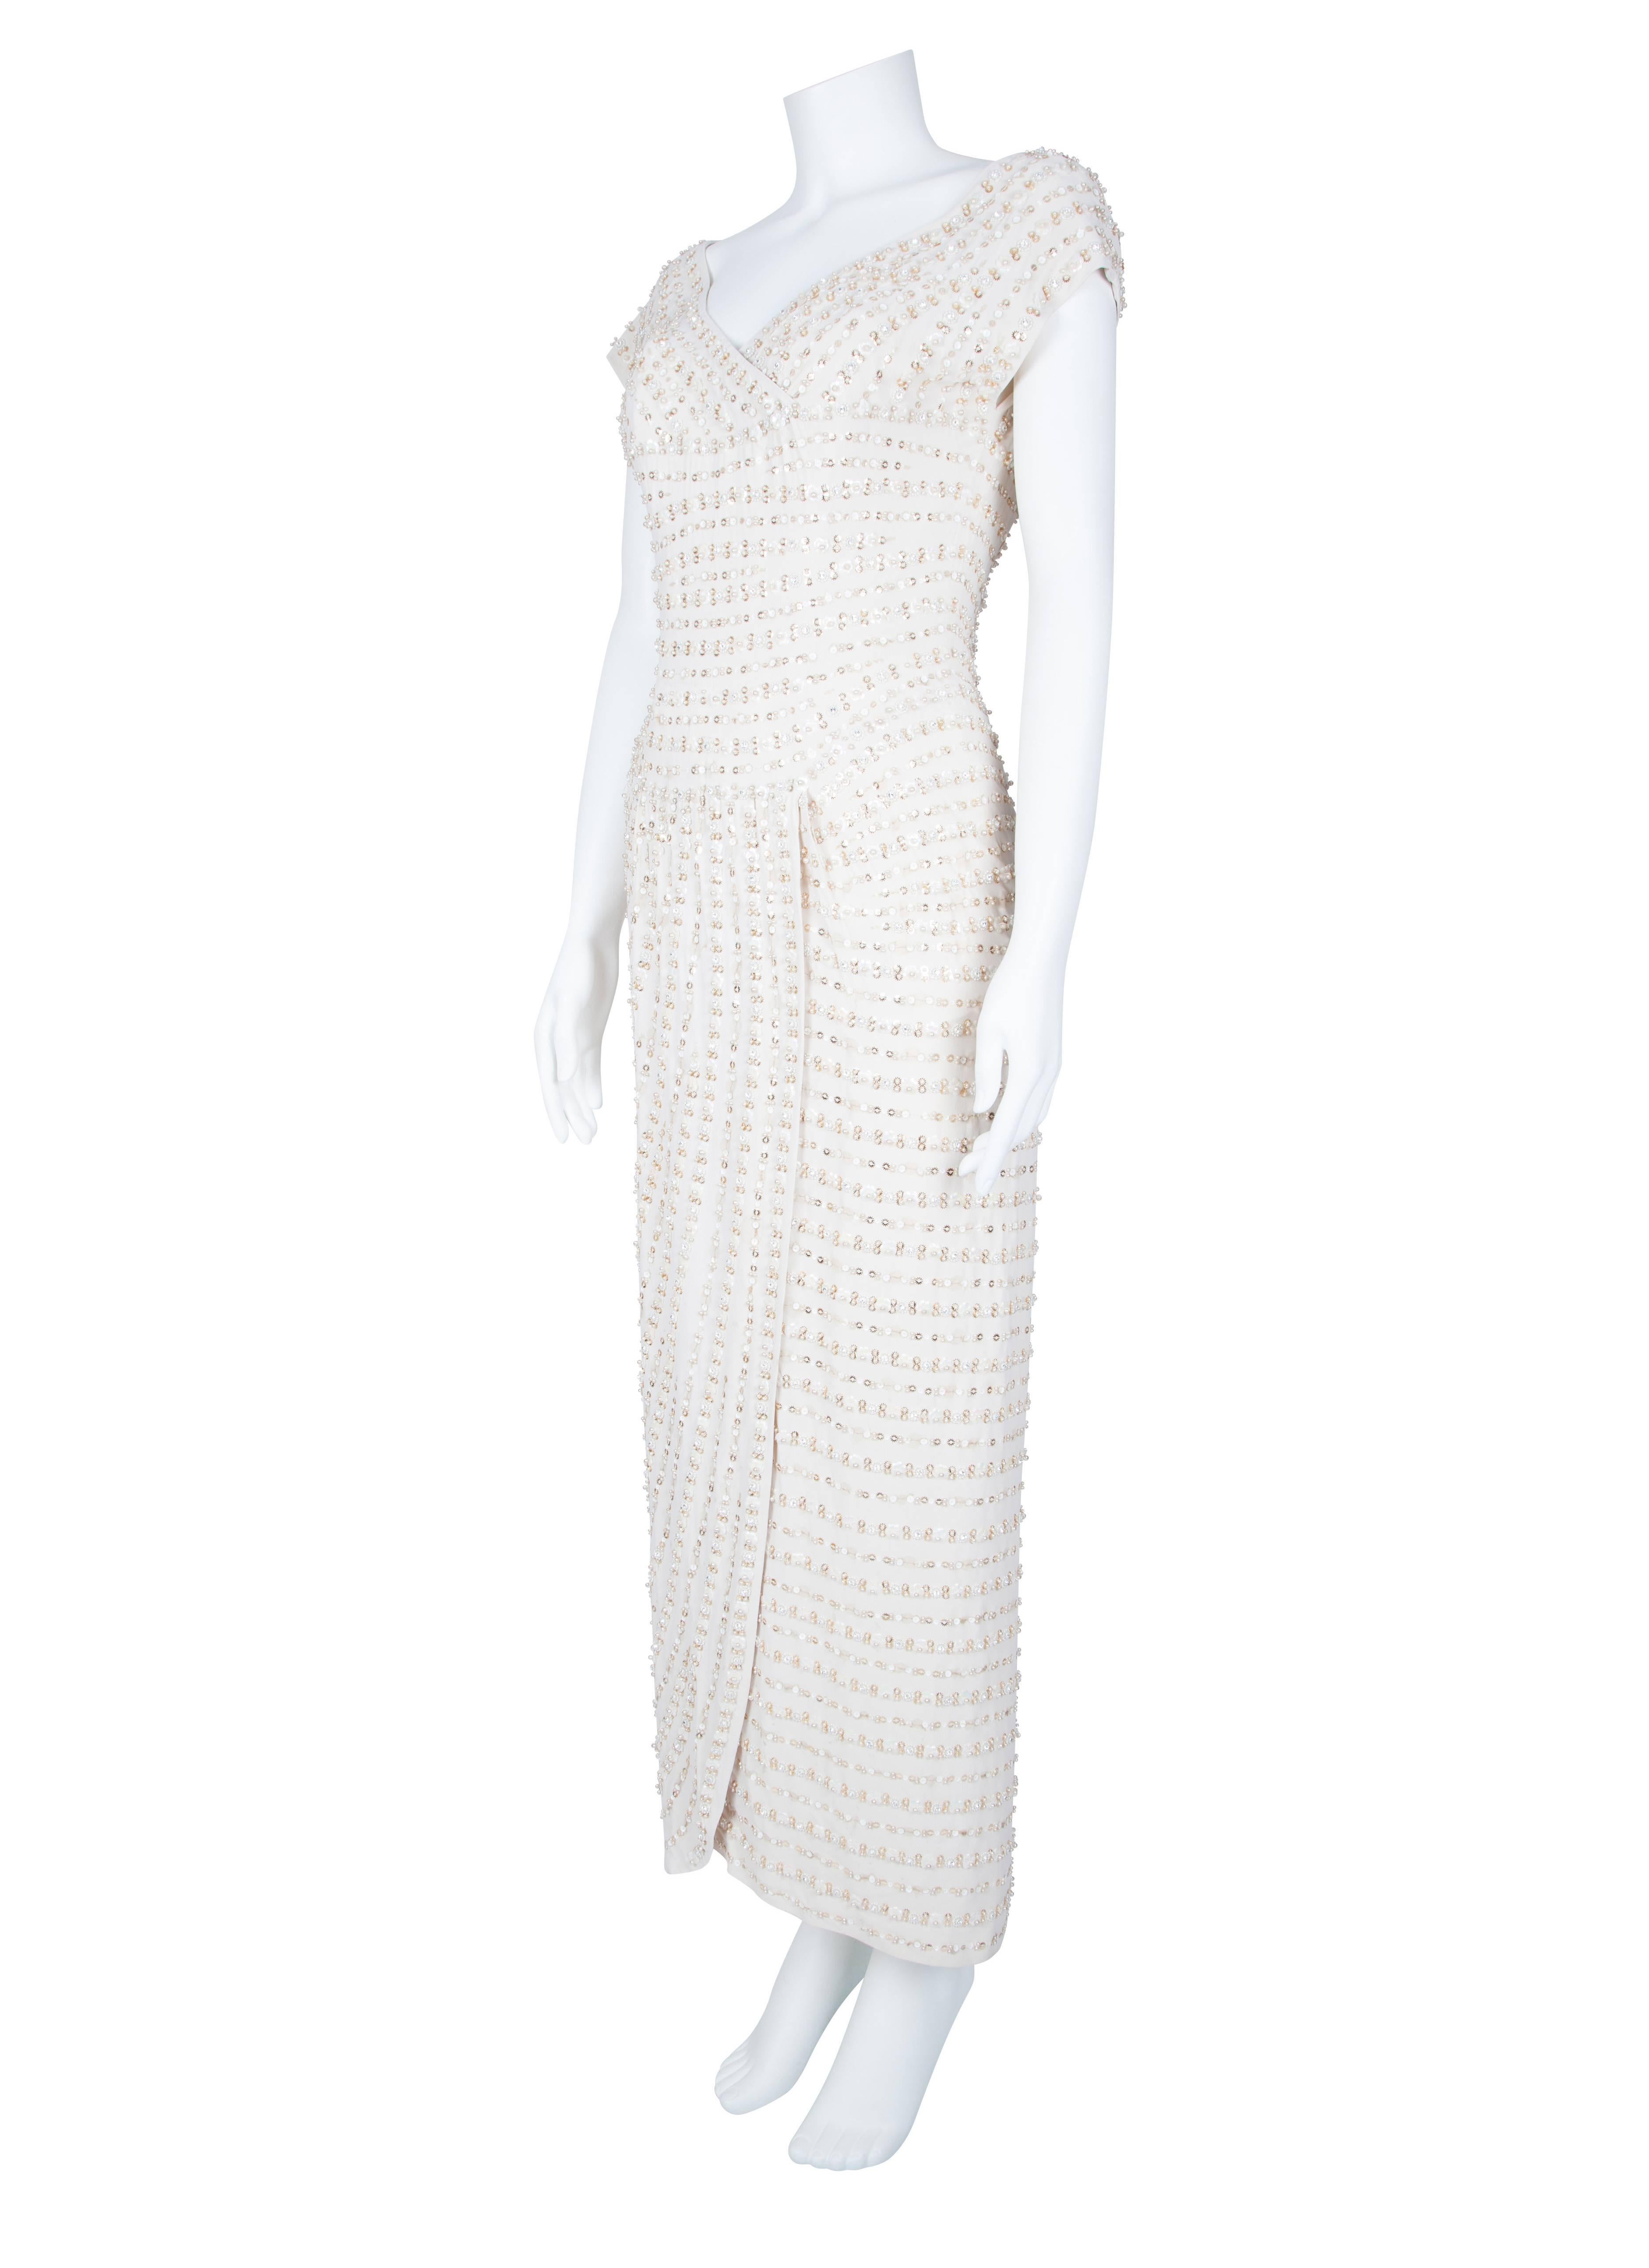 1950s Norman Hartnell Stunning Ivory Beaded Gown Approx Size UK 8 For Sale 1